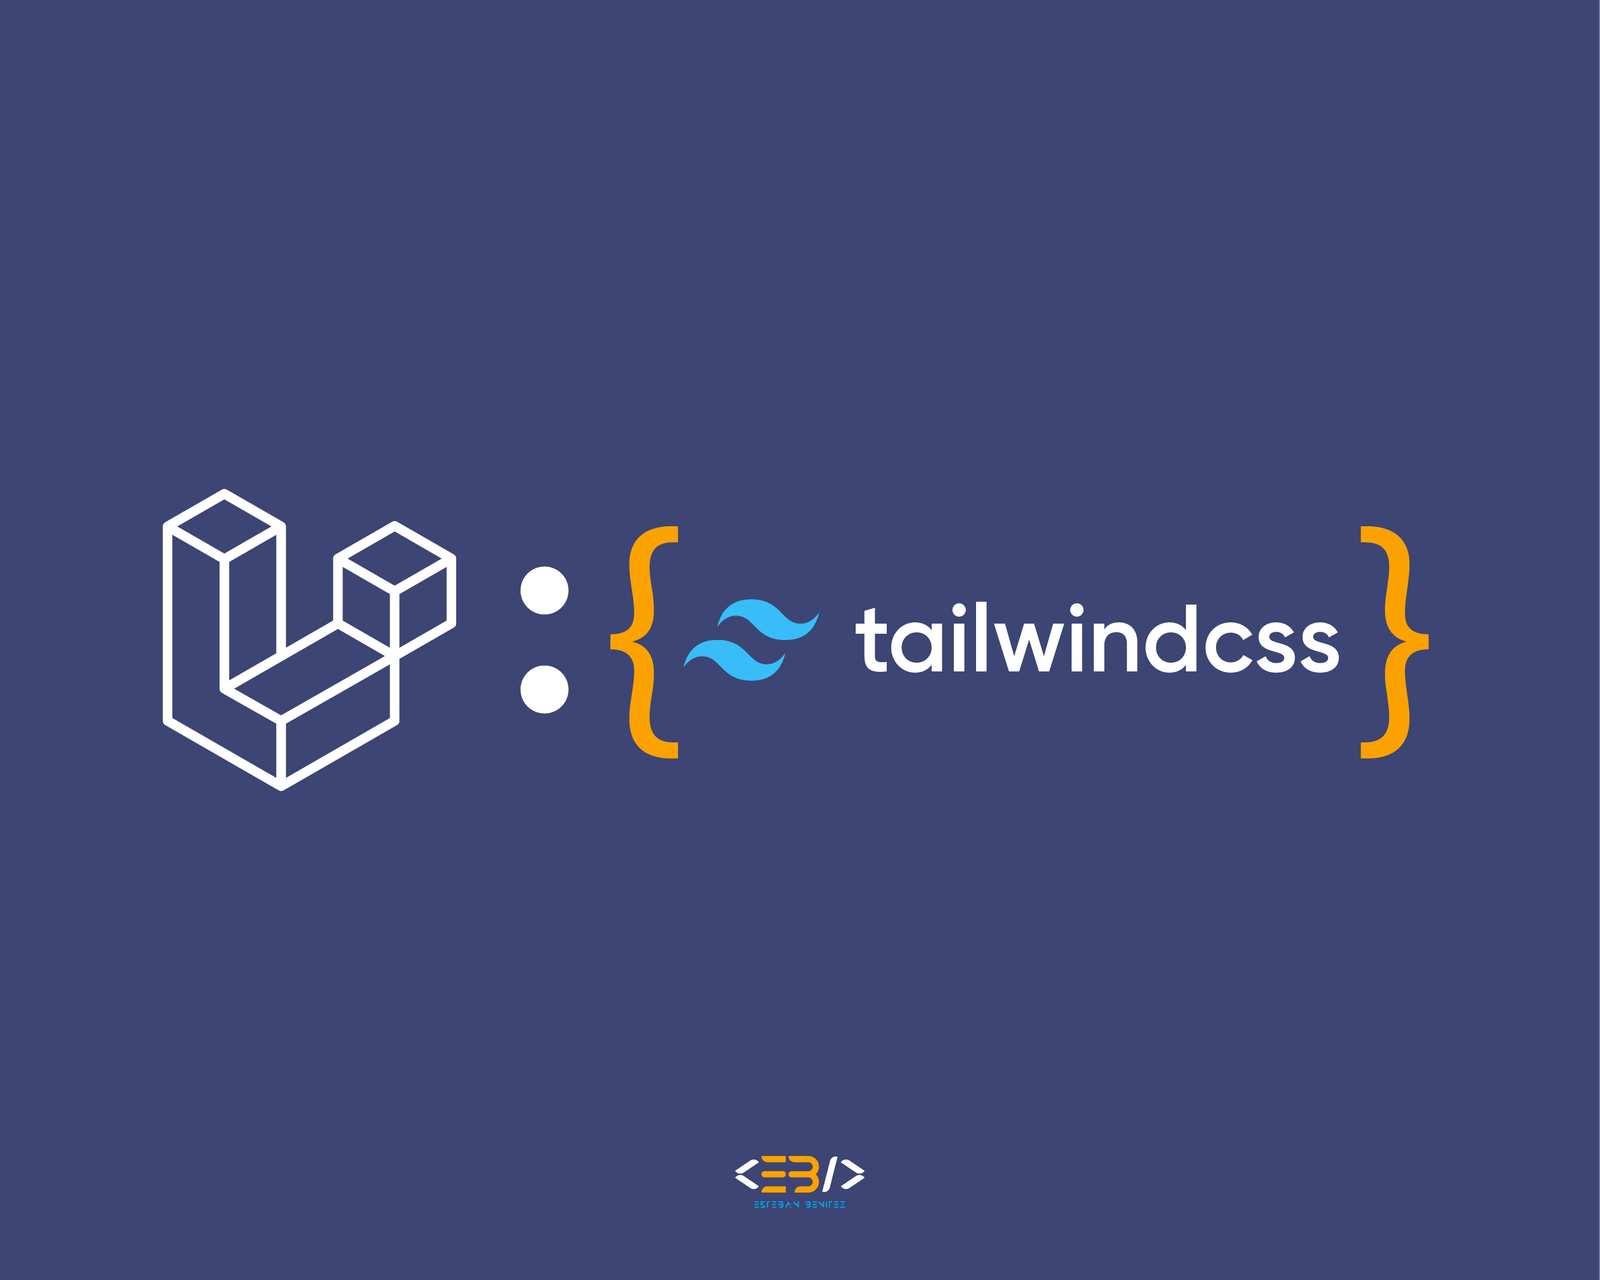 How to Install Tailwind CSS in a Laravel Project